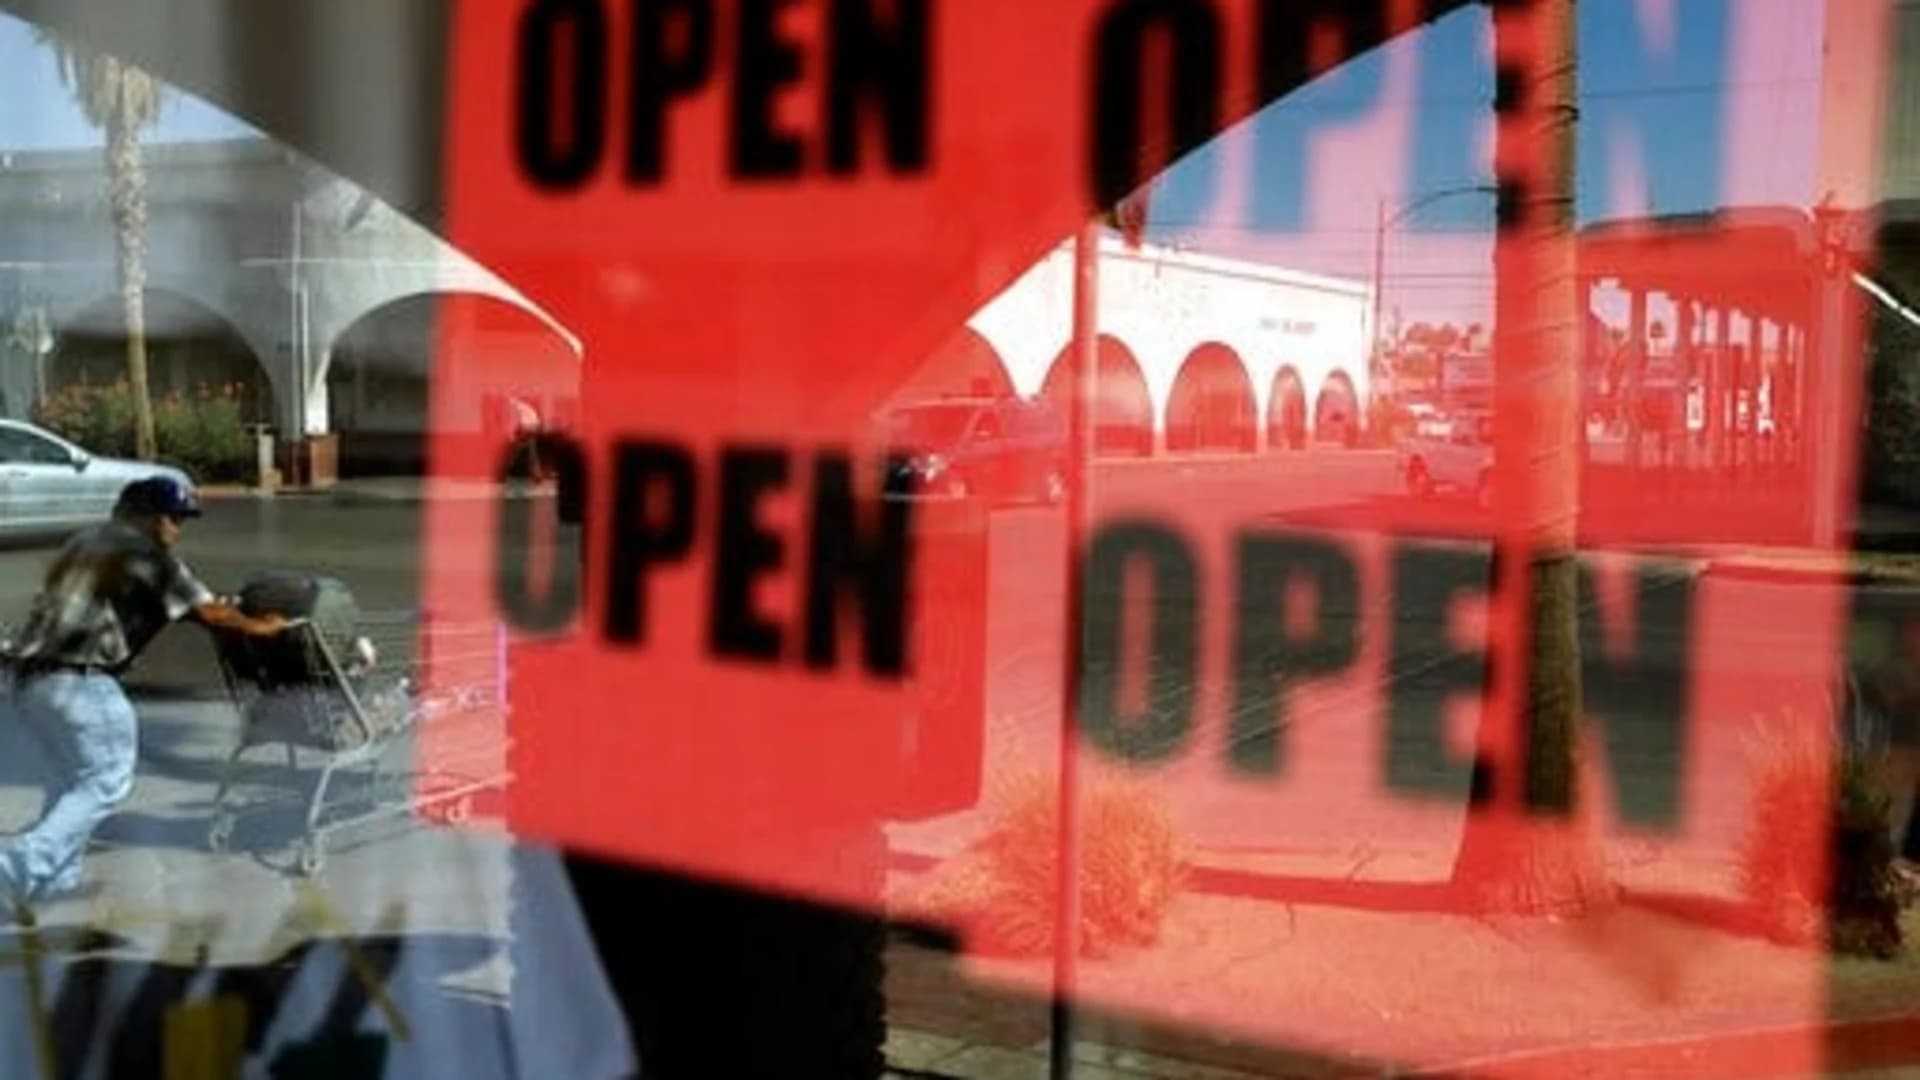 'We're Open' - Featuring the recovery of local businesses, Sept. 4, 2020